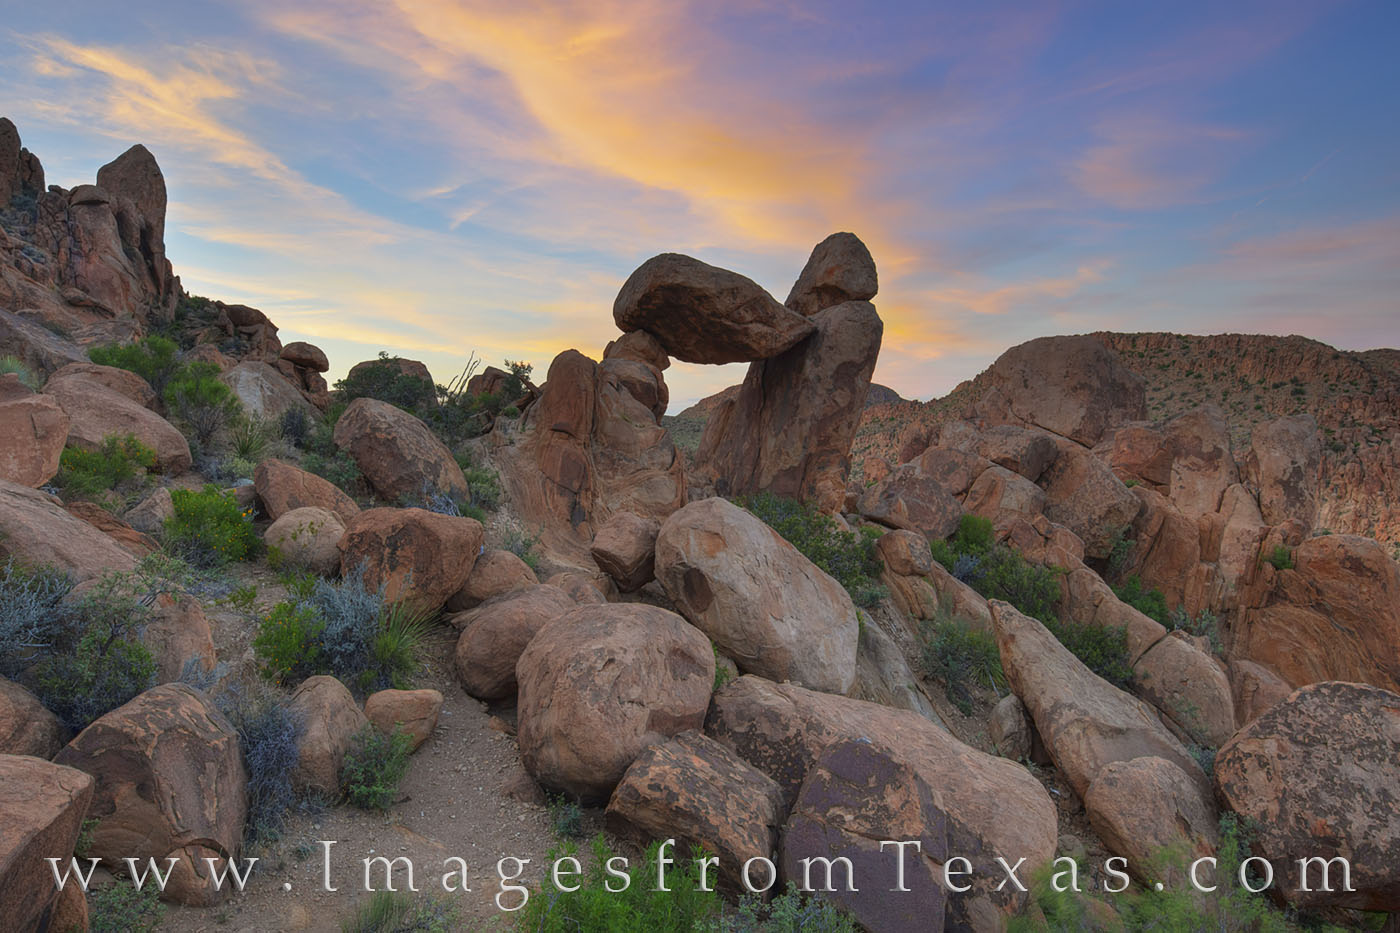 Looking northwest from at Balanced Rock in Big Bend National Park, the evening sky begins to turn pastel shades of pink and blue...